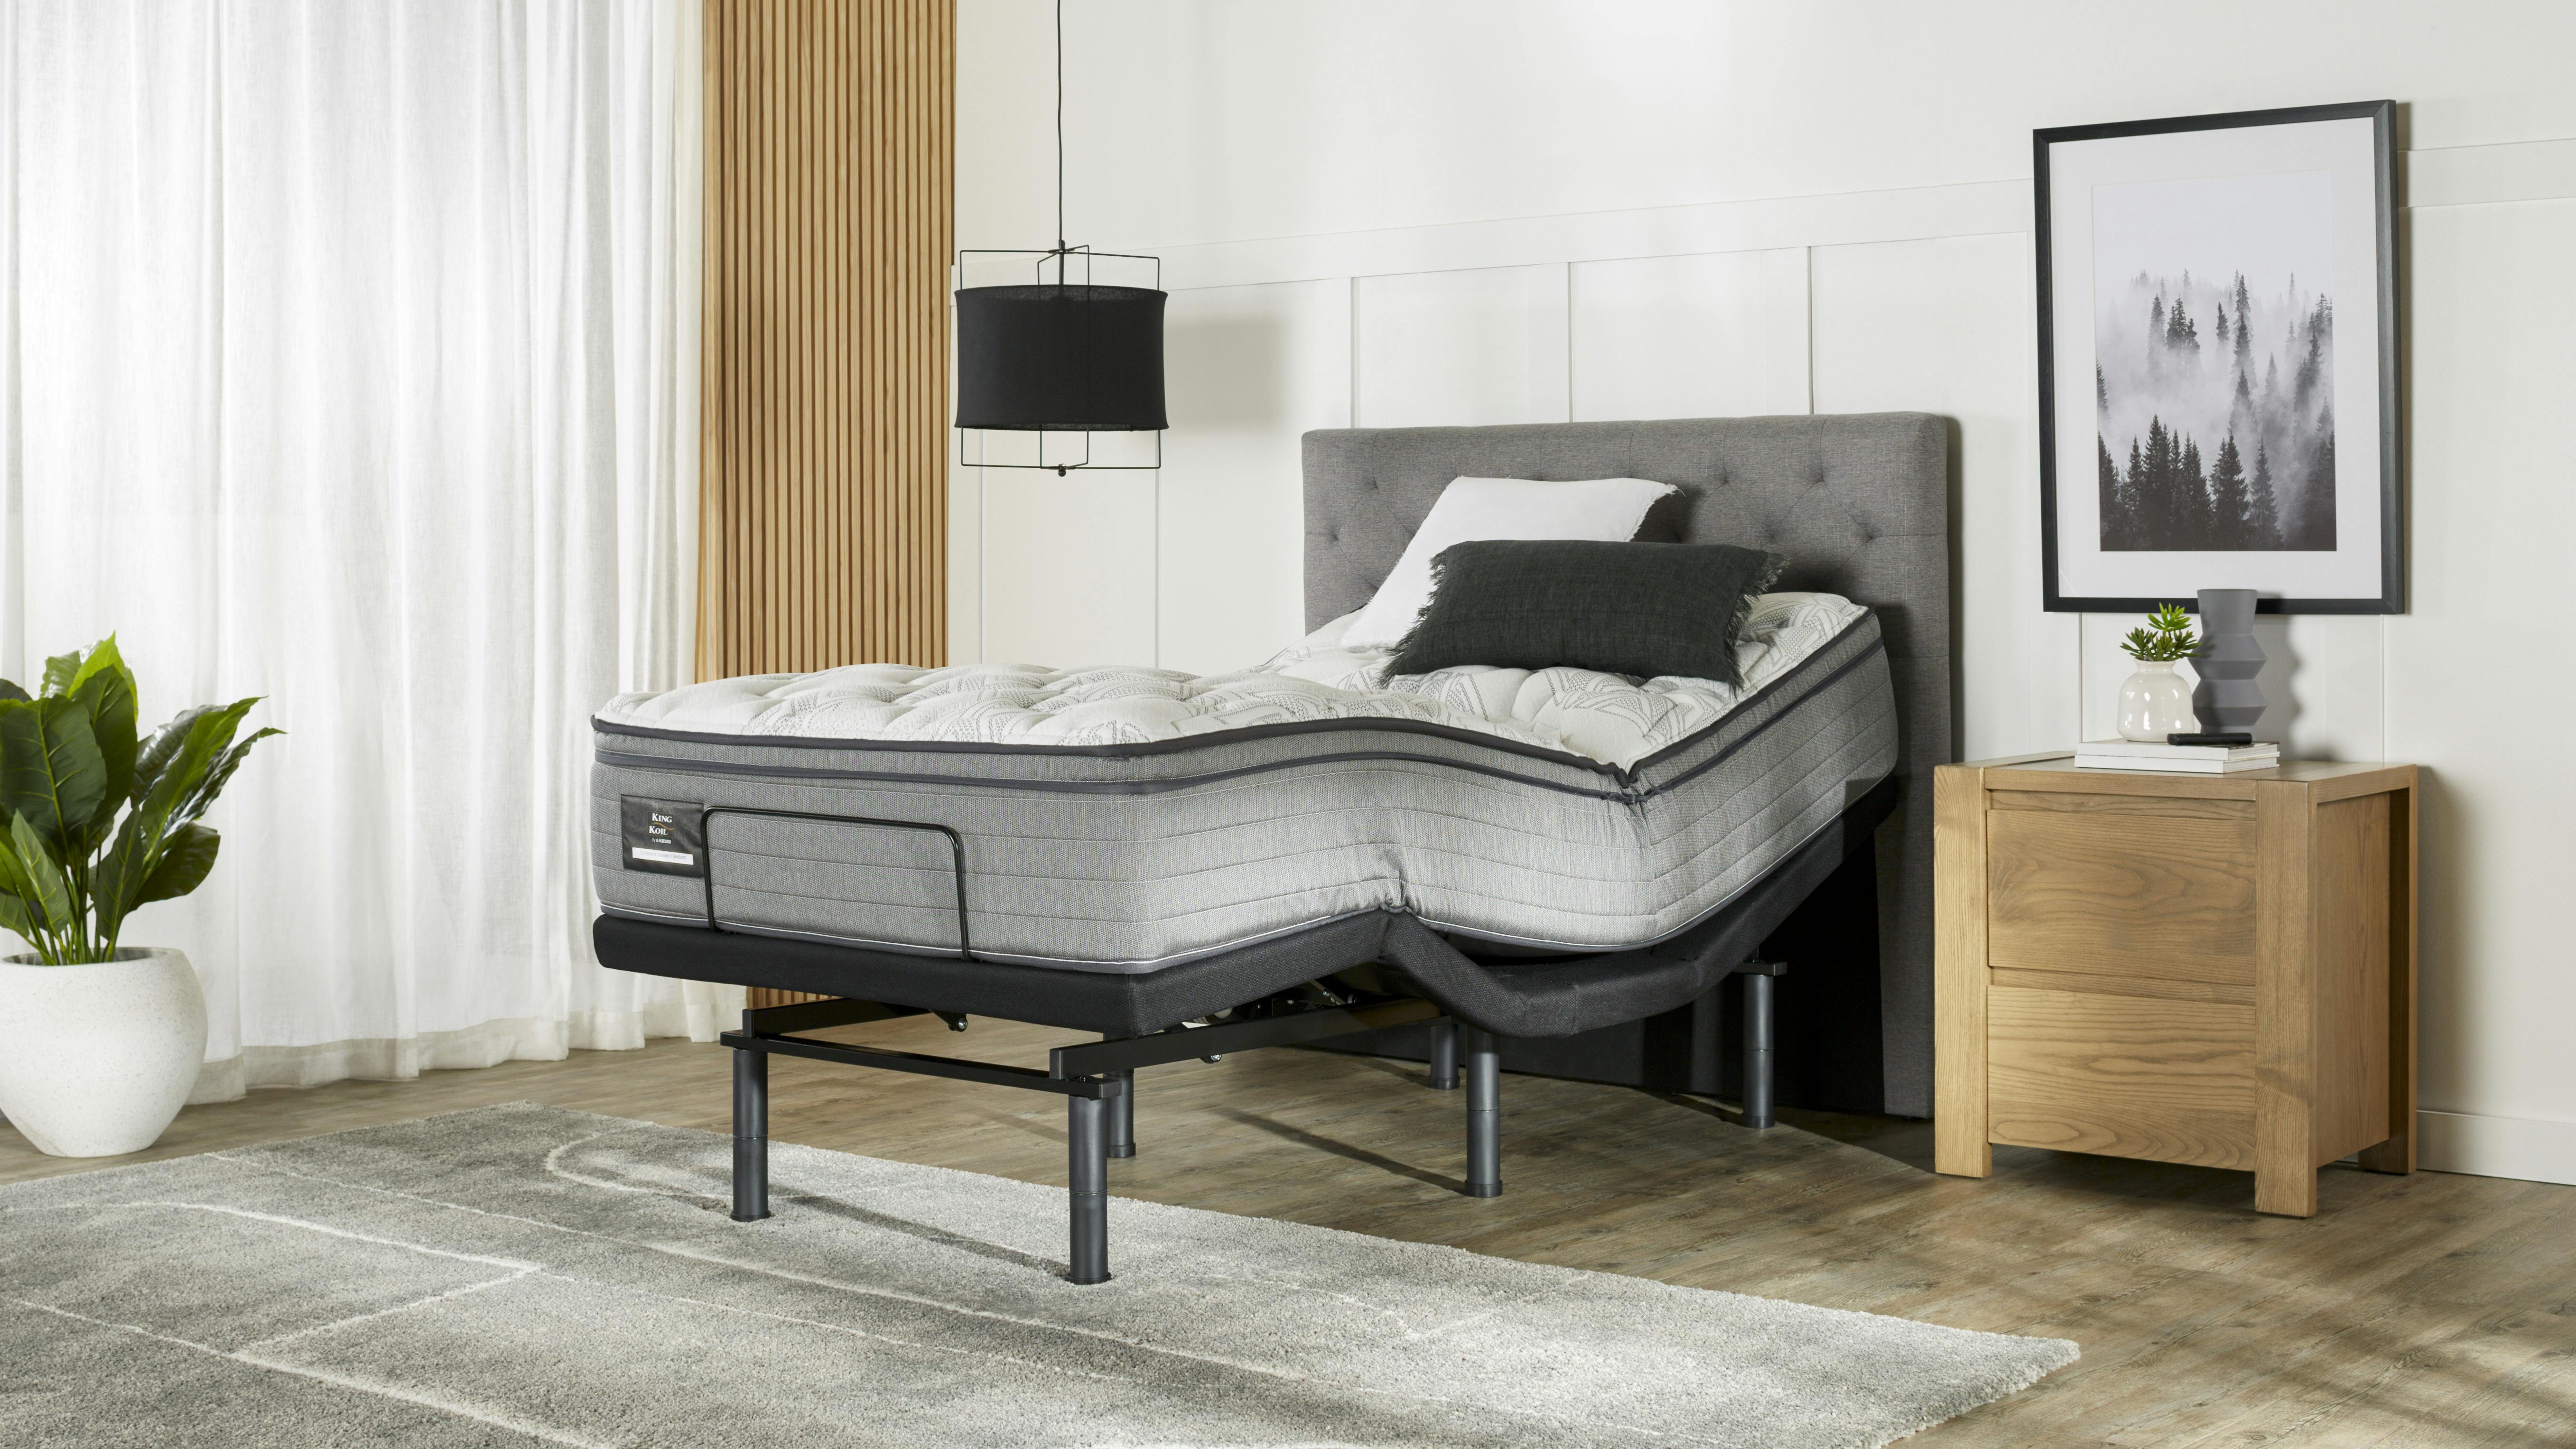 King Koil Conforma Deluxe II Medium King Single Mattress with Virtue Adjustable Base by A.H Beard